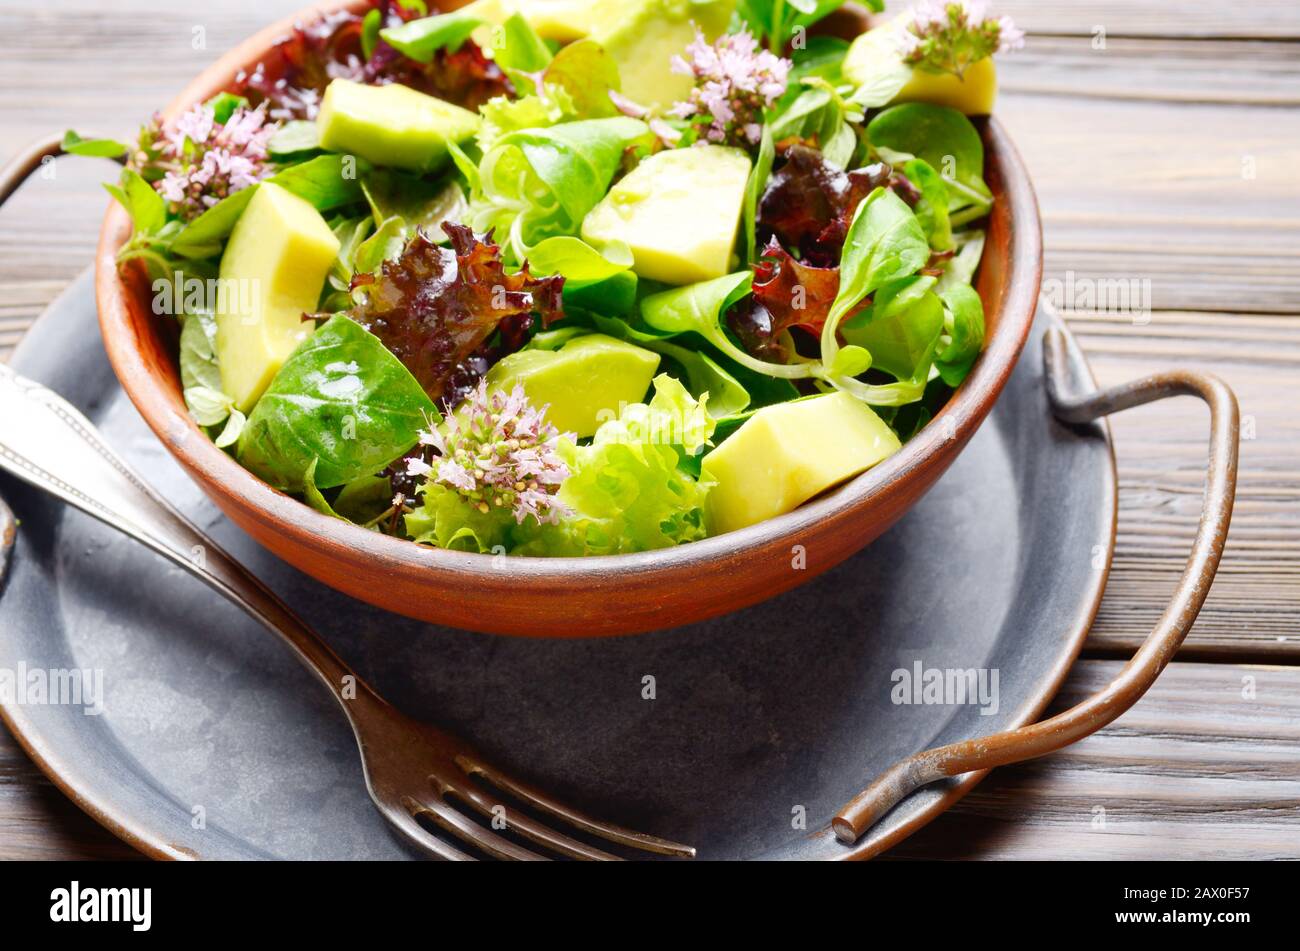 Clay dish with salad of avocado, green and violet lettuce, lamb's lettuce and oregano flowers with vintage fork aside Stock Photo